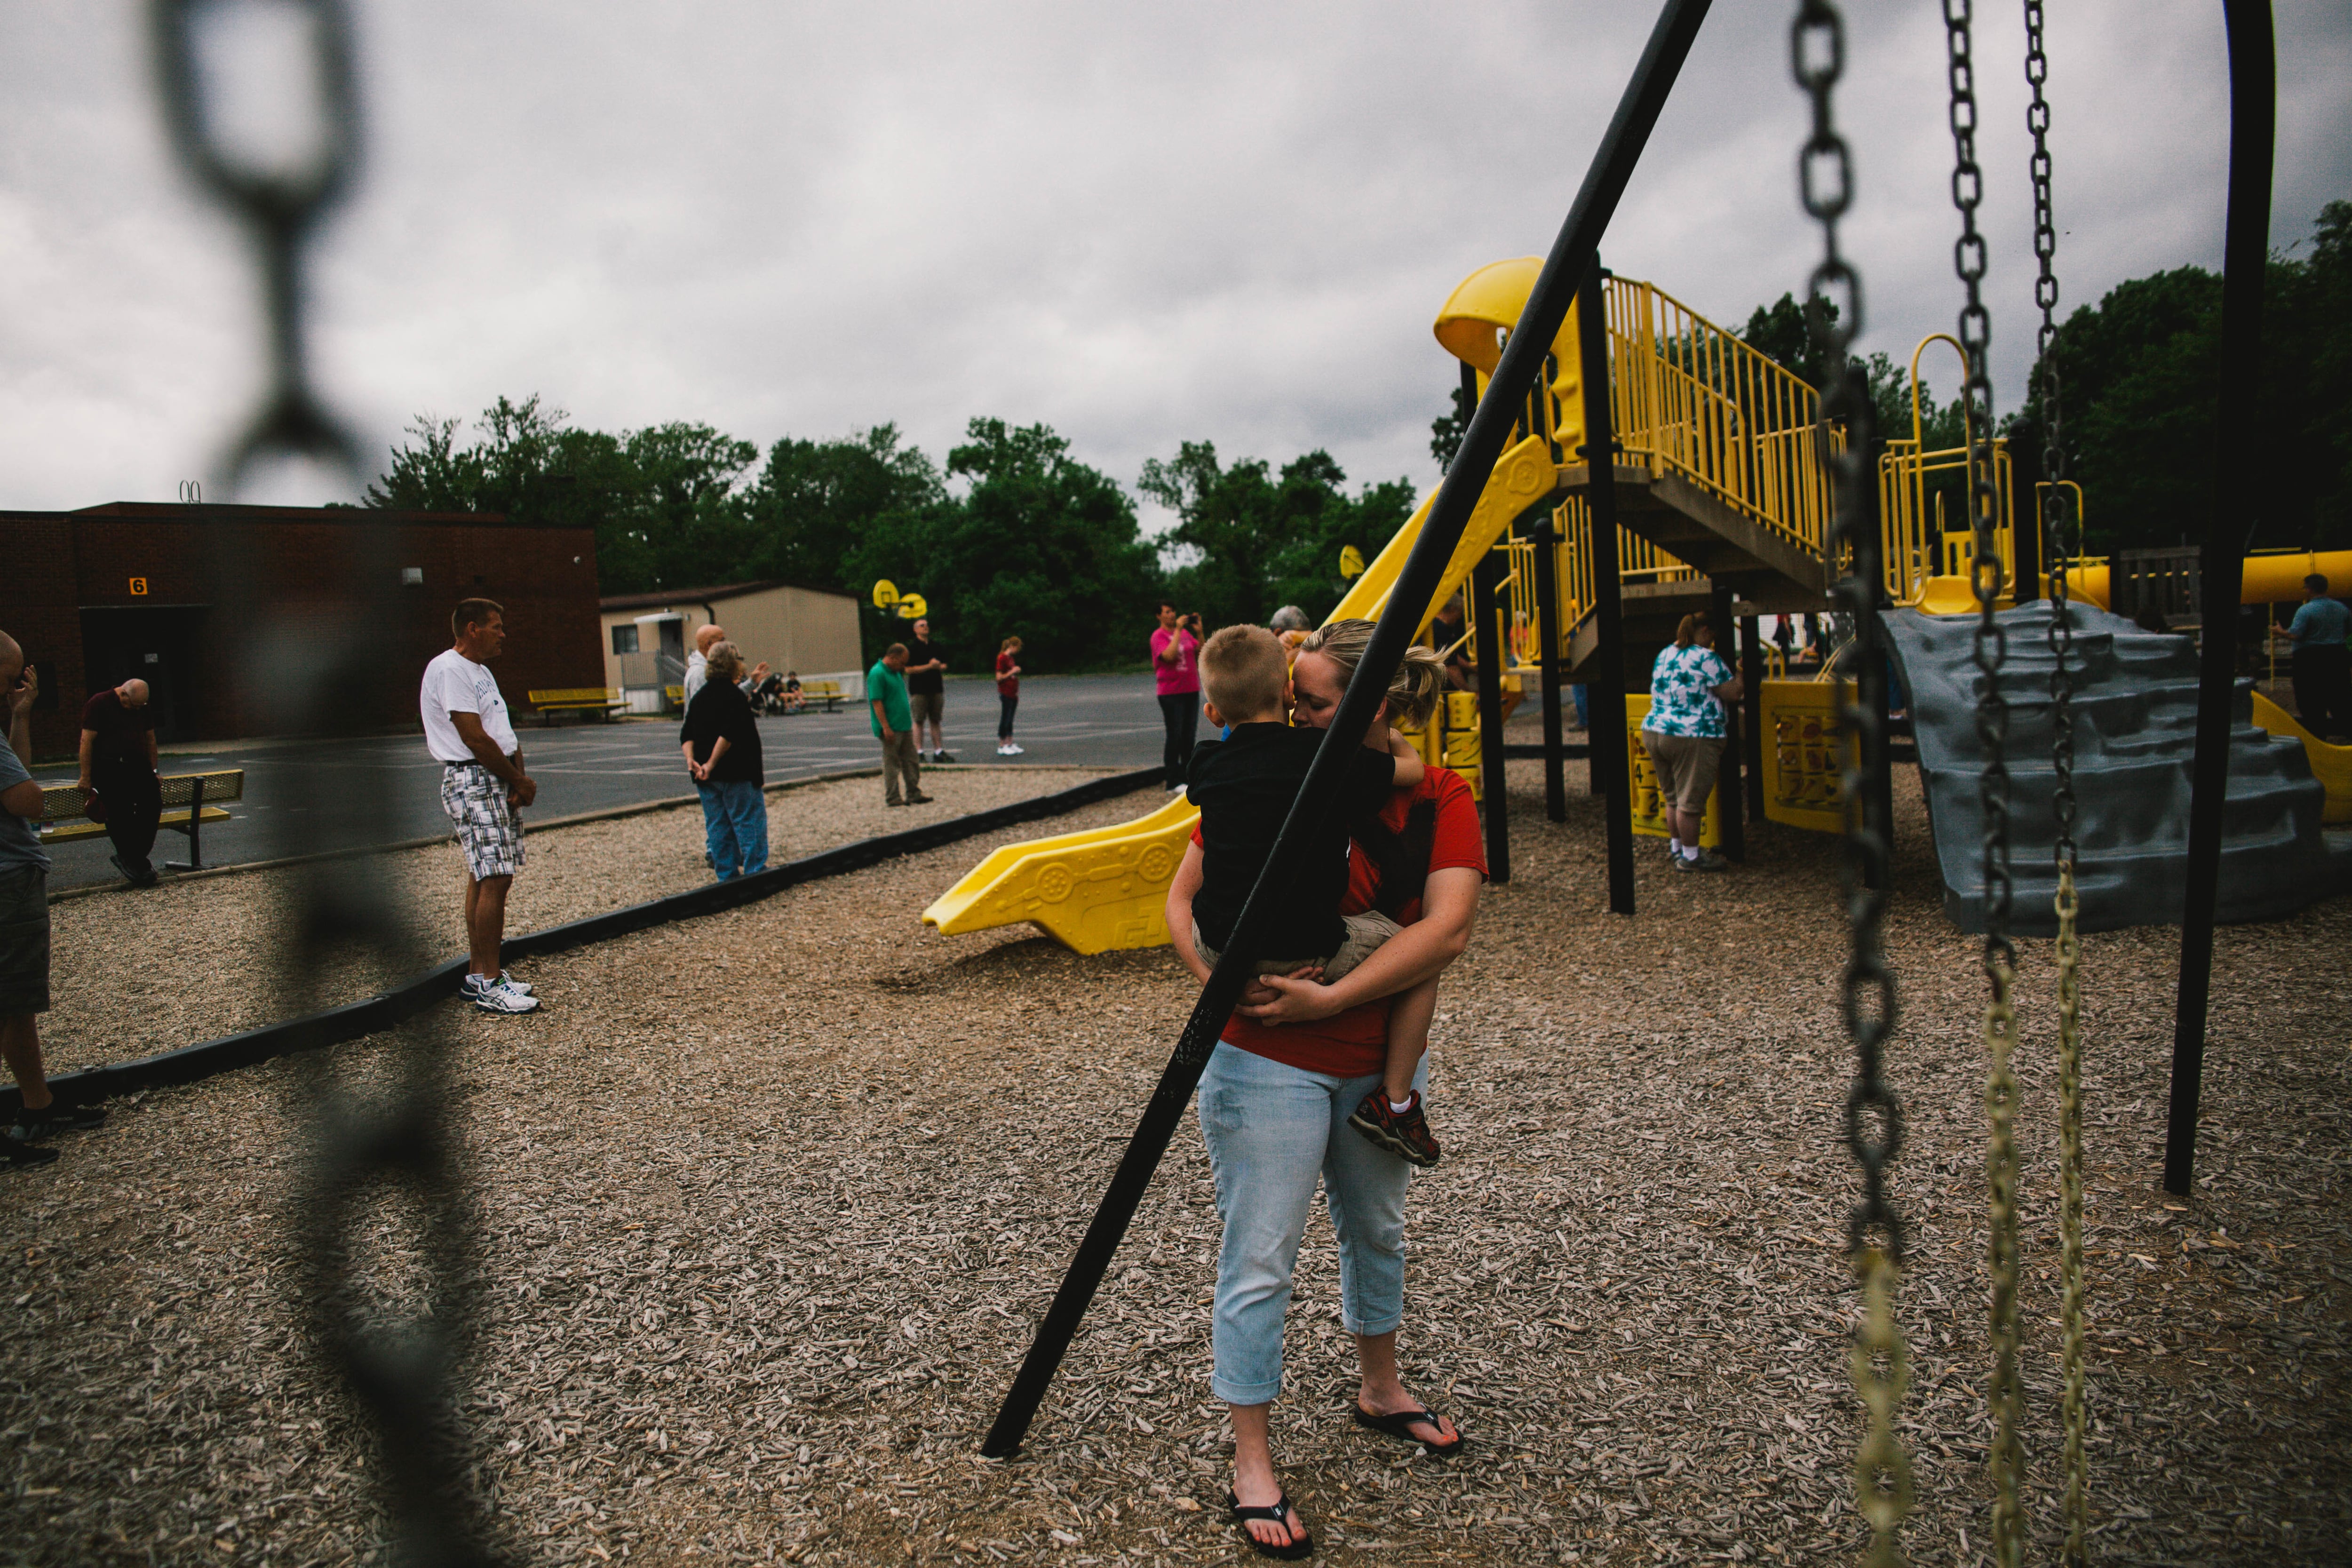 A woman holds her child next to a set of swings, as a circle of people pray around the edge of the playground.